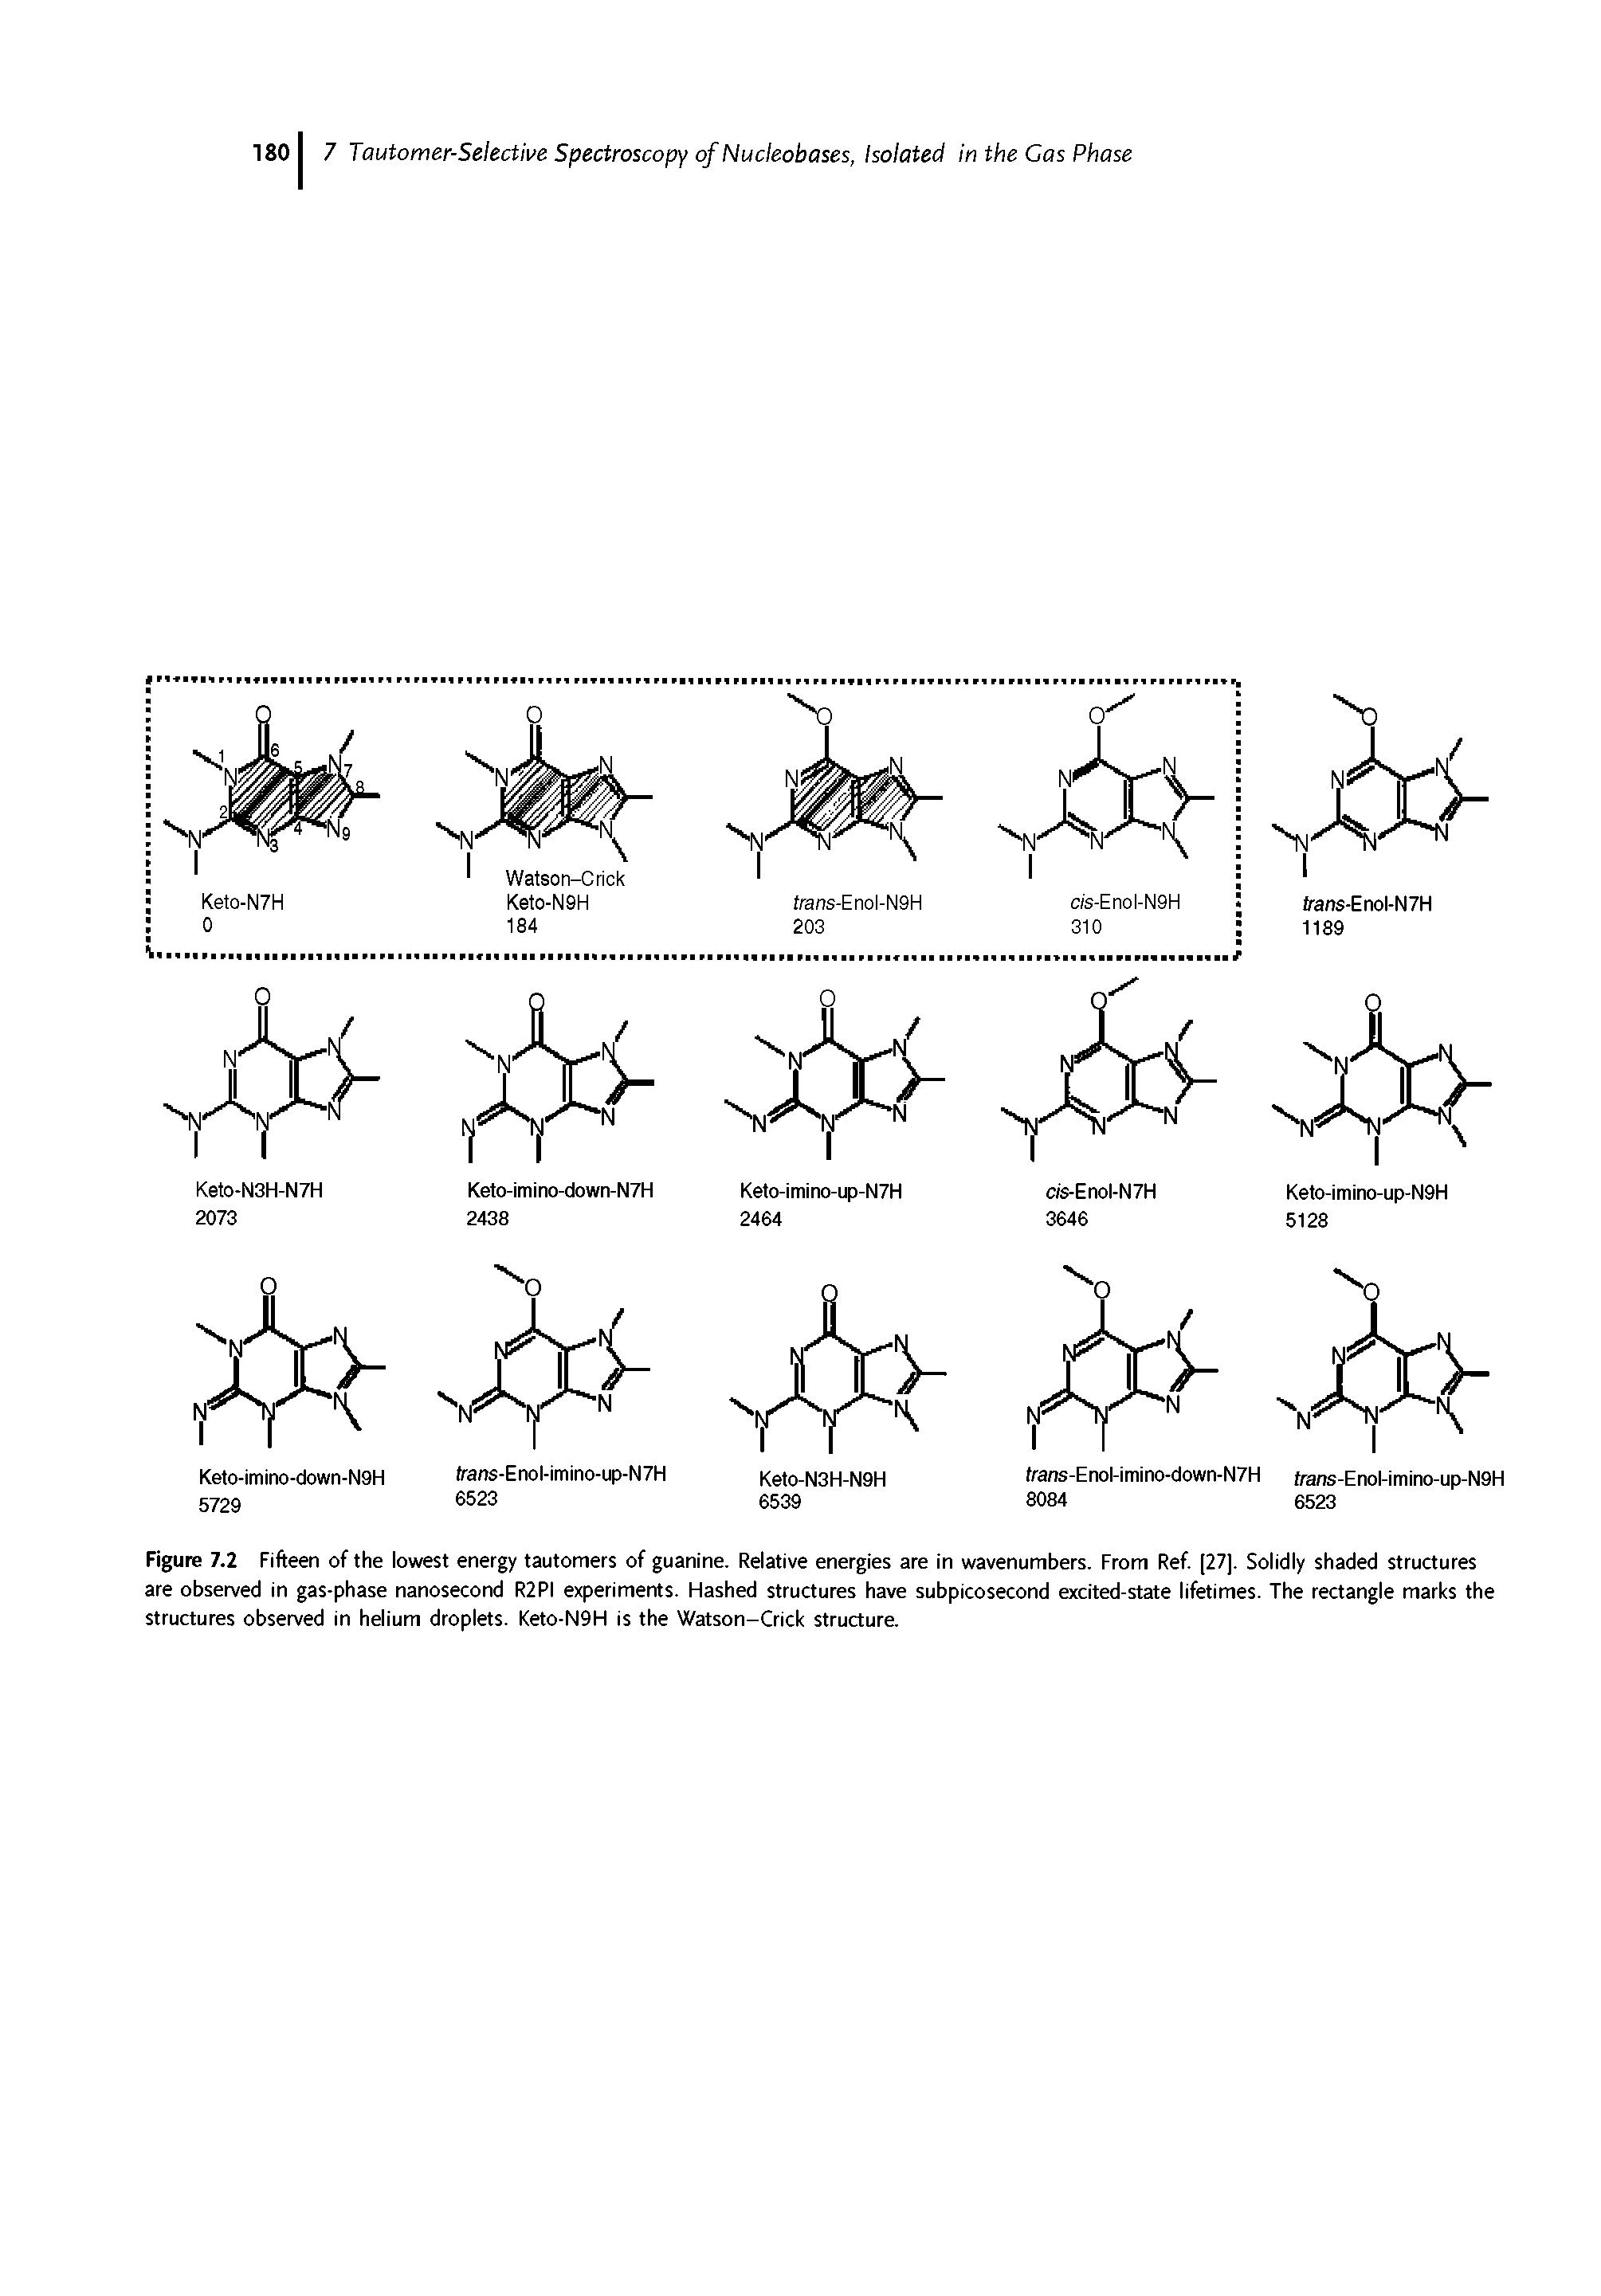 Figure 7.2 Fifteen of the lowest energy tautomers of guanine. Relative energies are in wavenumbers. From Ref (27). Solidly shaded structures are observed In gas-phase nanosecond R2PI experiments. Hashed structures have subpicosecond excited-state lifetimes. The rectangle marks the structures observed in helium droplets. Keto-N9H is the Watson-Crick structure.